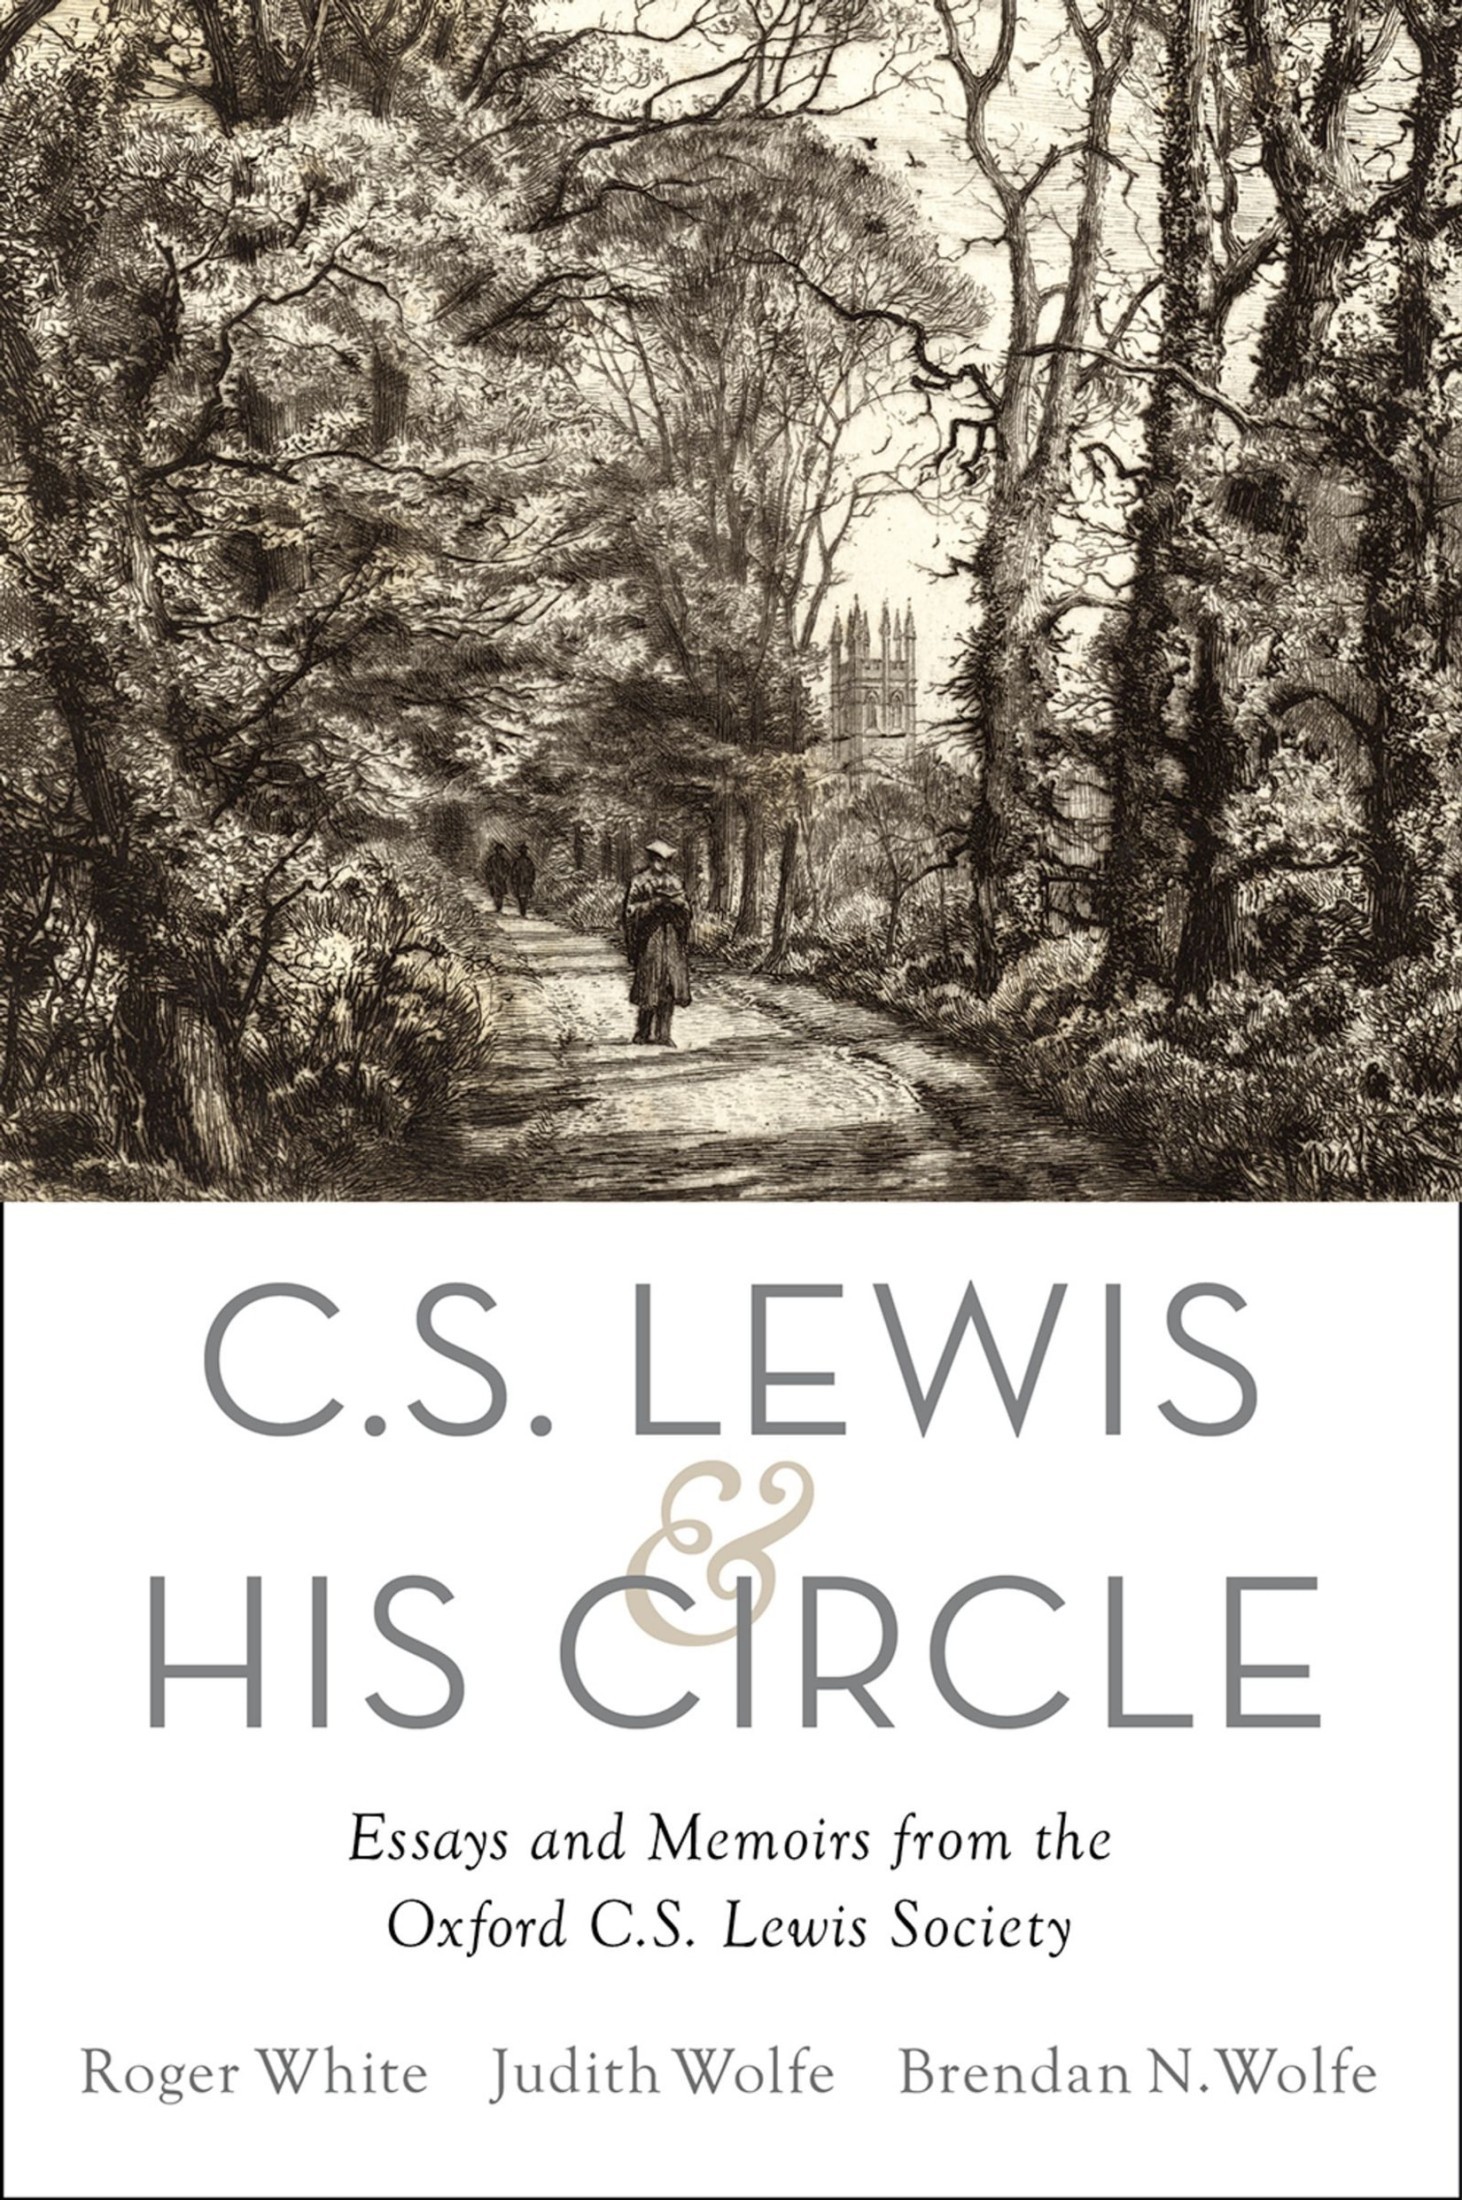 C.S. Lewis and His Circle: Essays and Memoirs From the Oxford C.S. Lewis Society